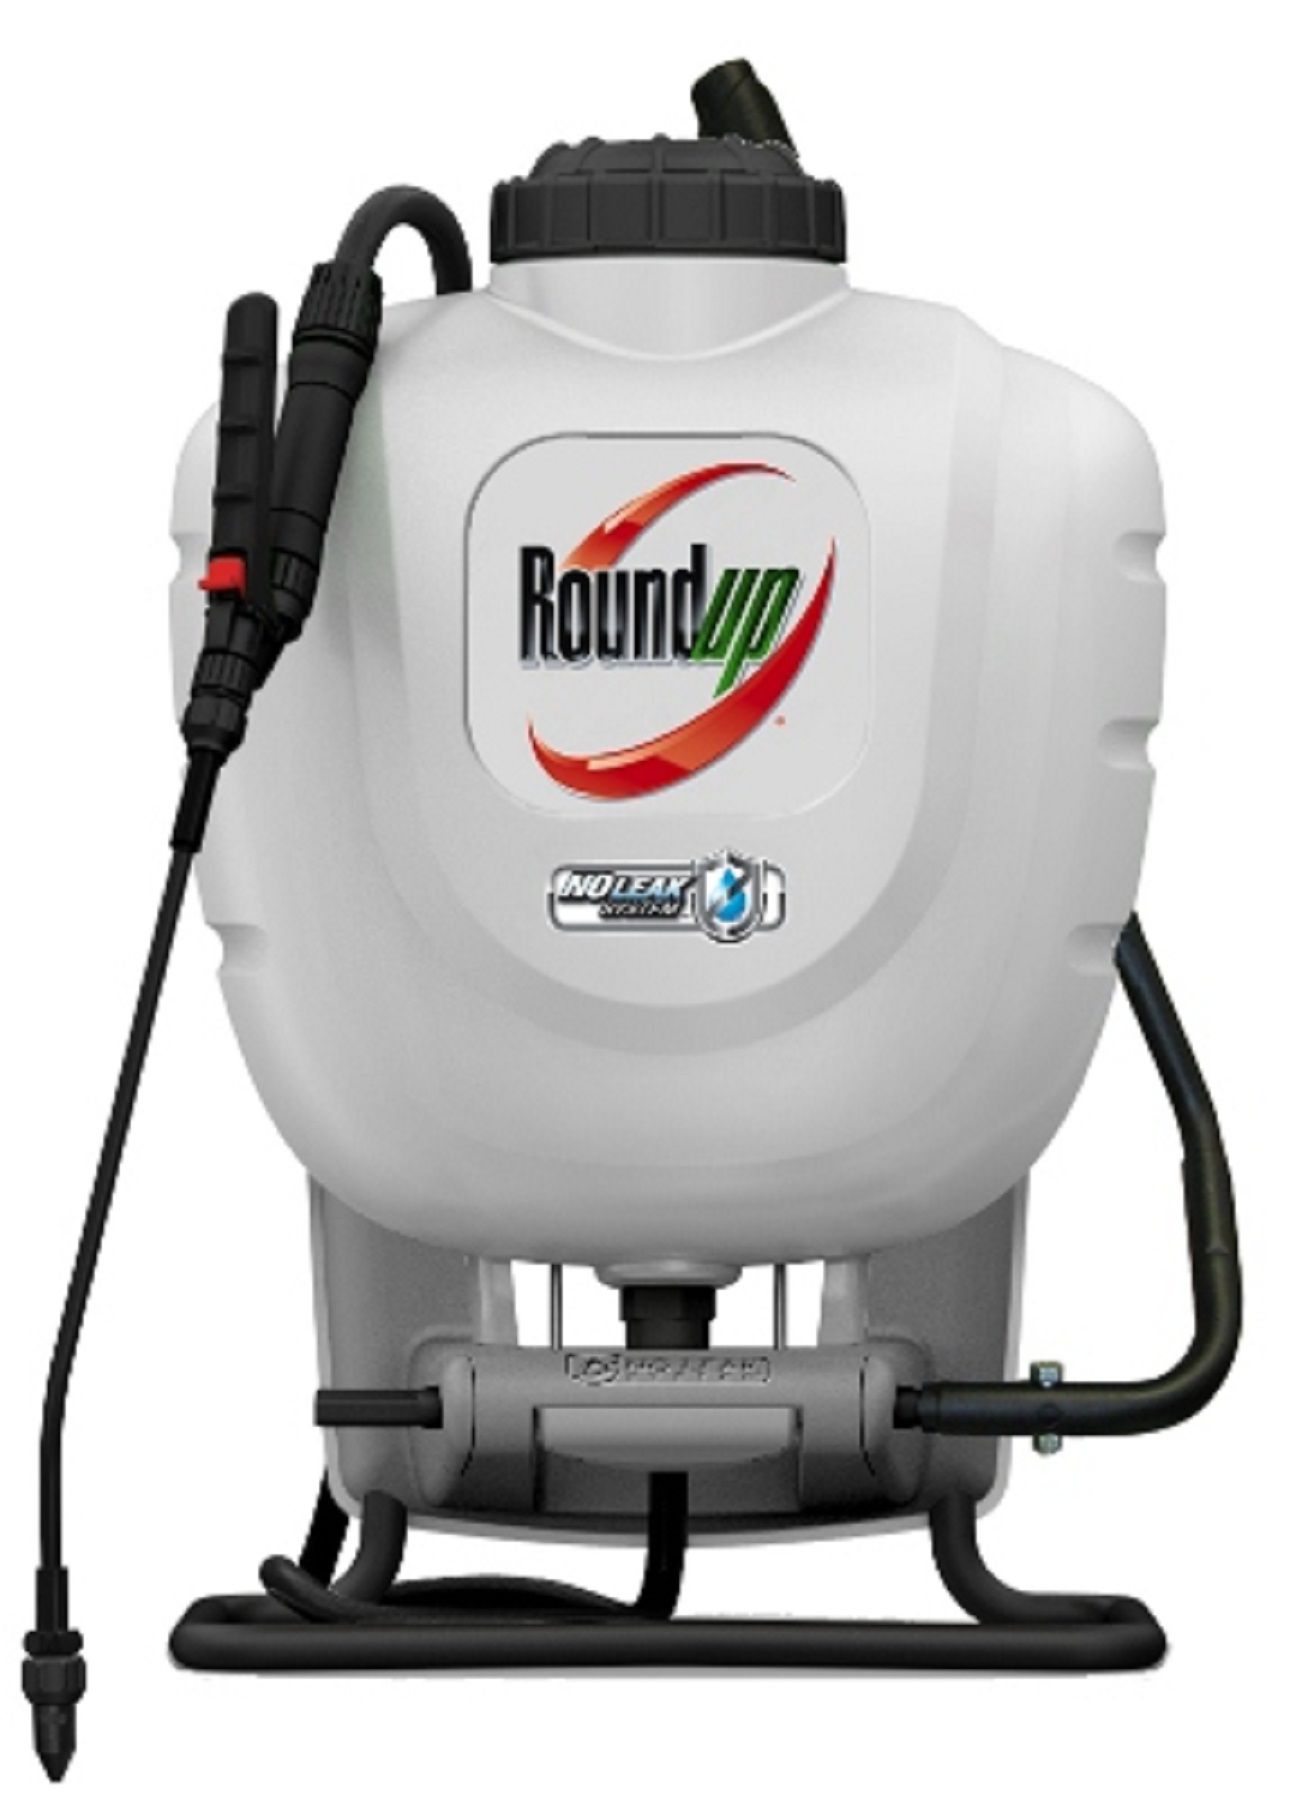 Roundup 190327 4 Gallon Professional Backpack